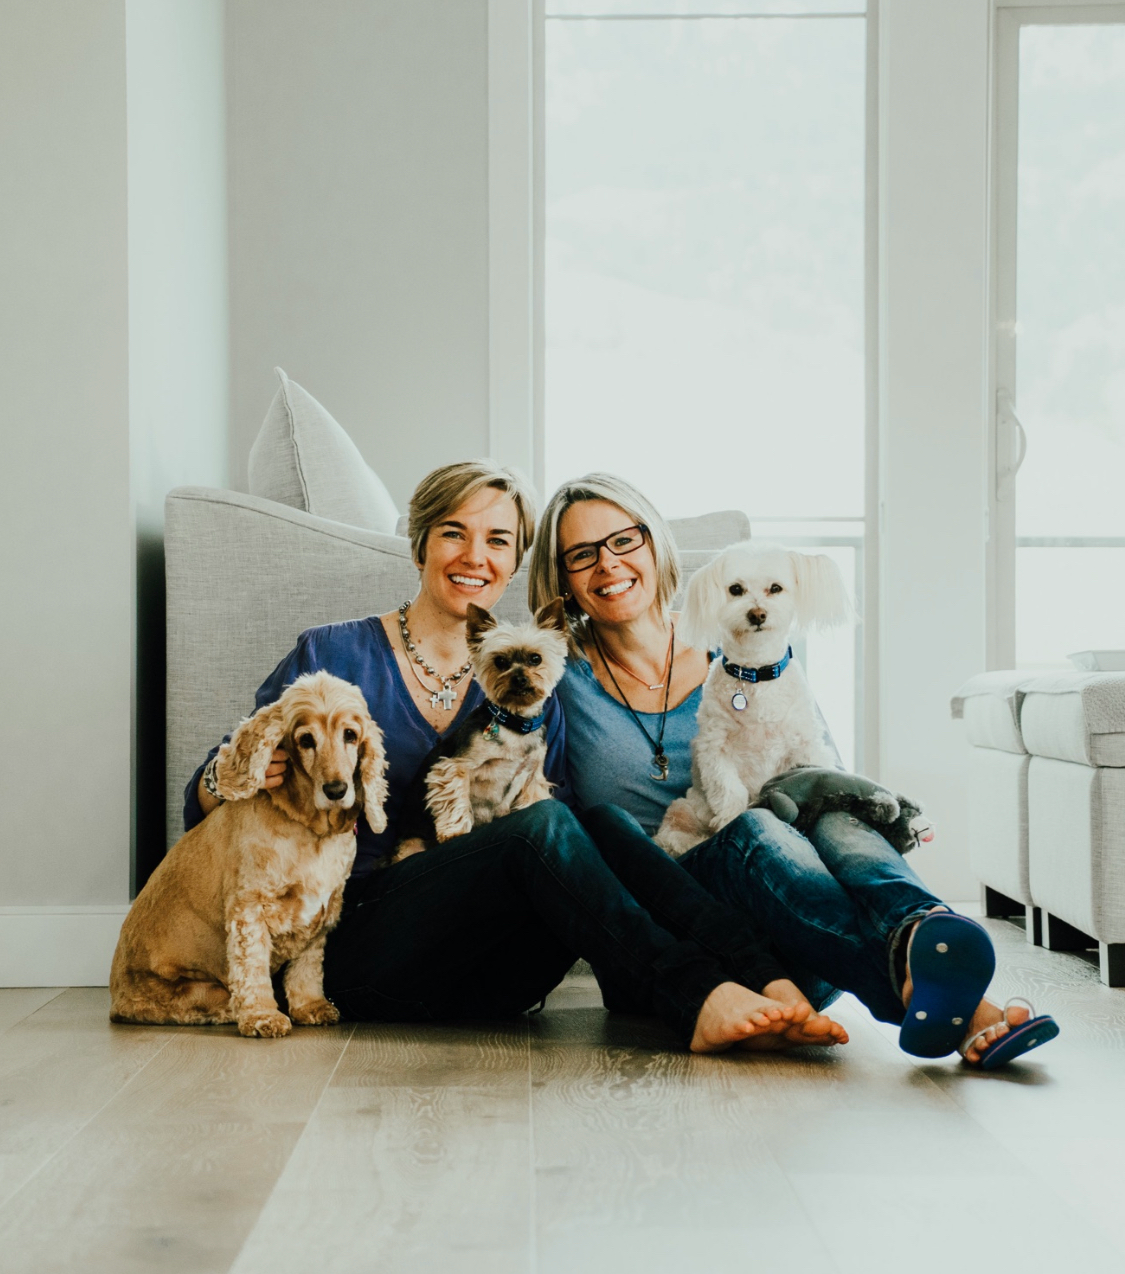 Two women with short blonde hair, smiling, wearing blue tops and jeans, with three dogs: a Spaniel, Yorkie and Maltese.